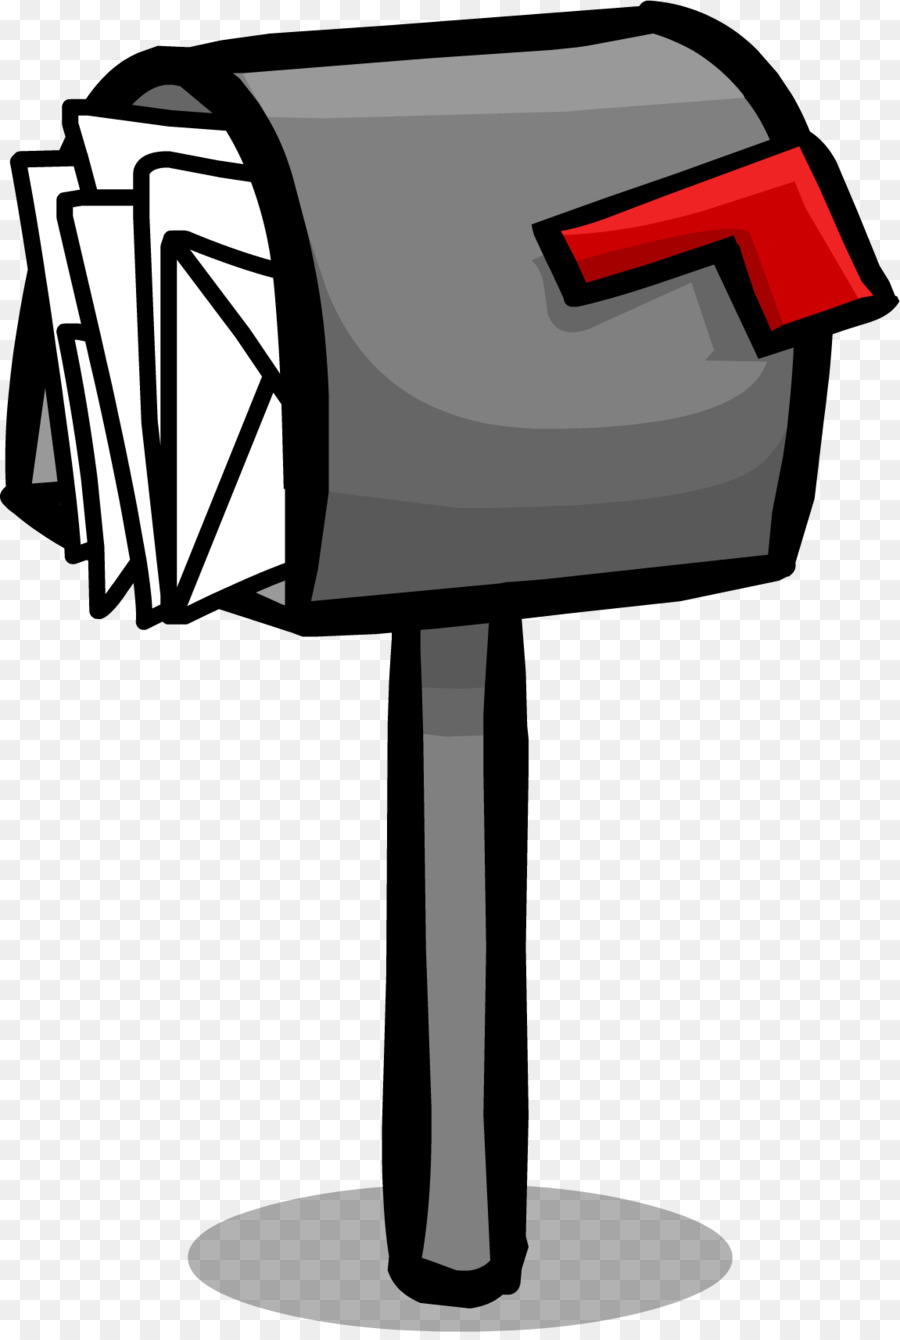 Post box Letter box Mail Club Penguin - Mailbox png download - 1151*1704 - Free Transparent Post Box png Download.